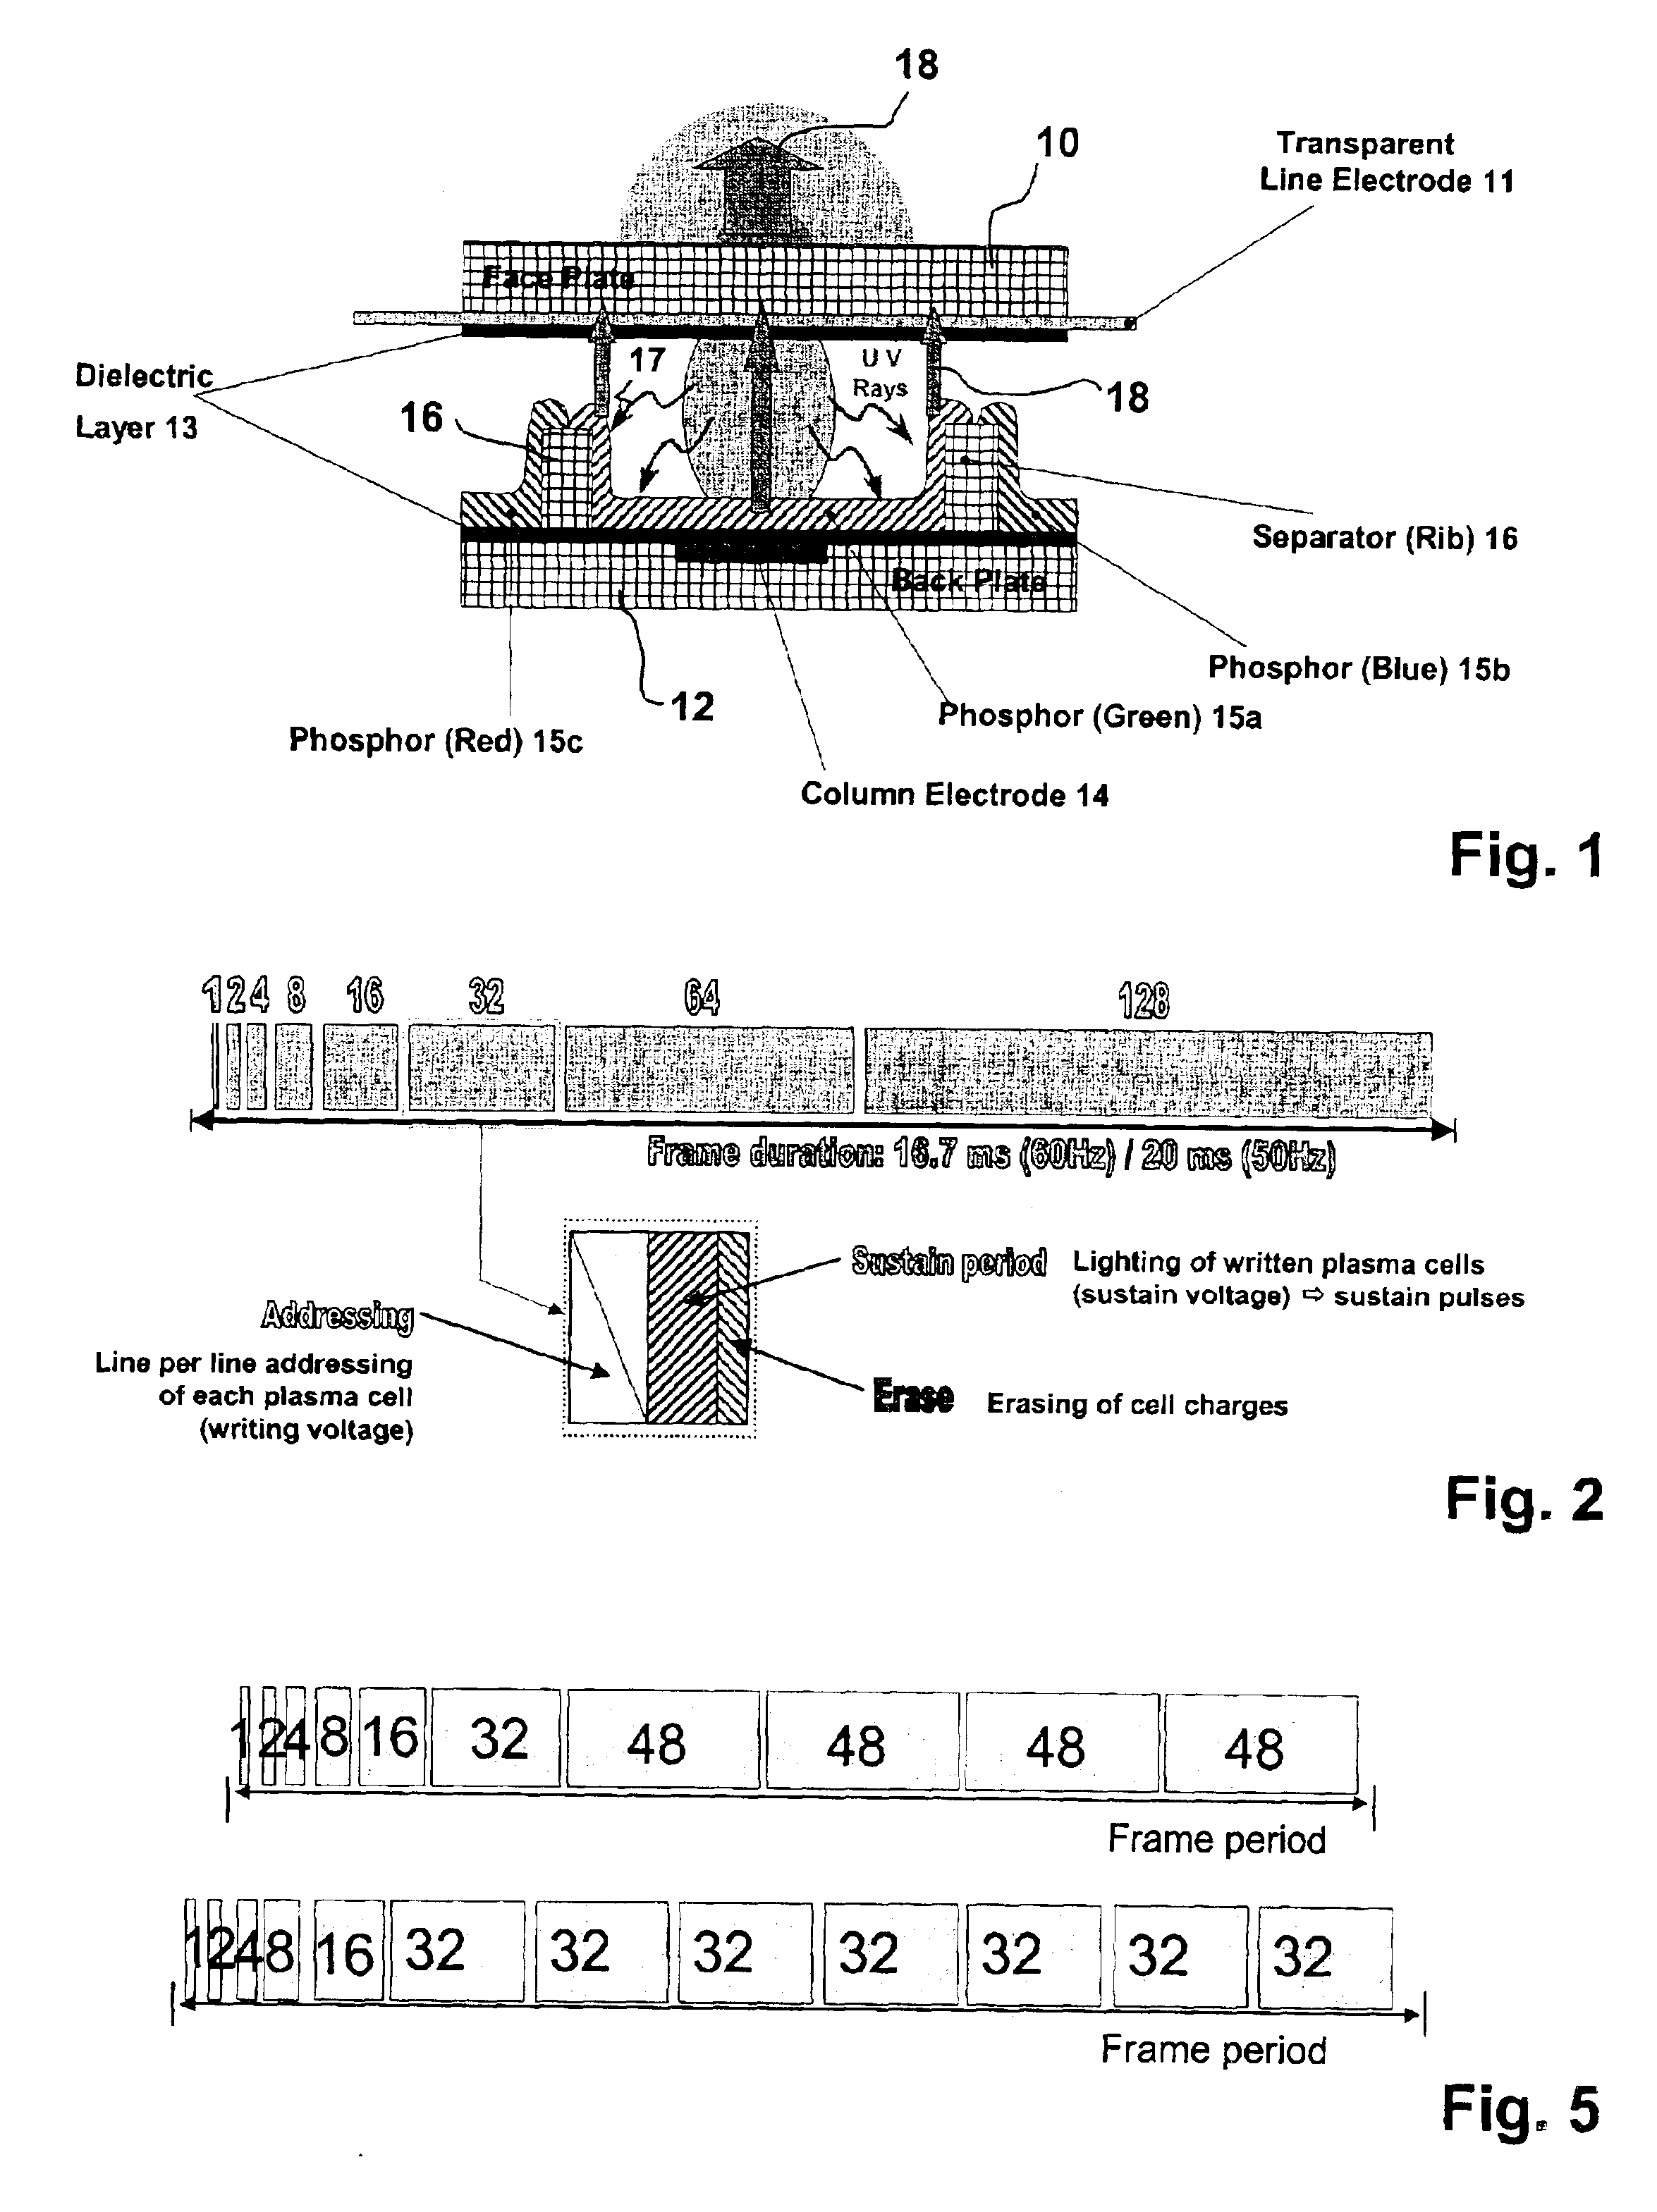 Method and apparatus for processing video pictures